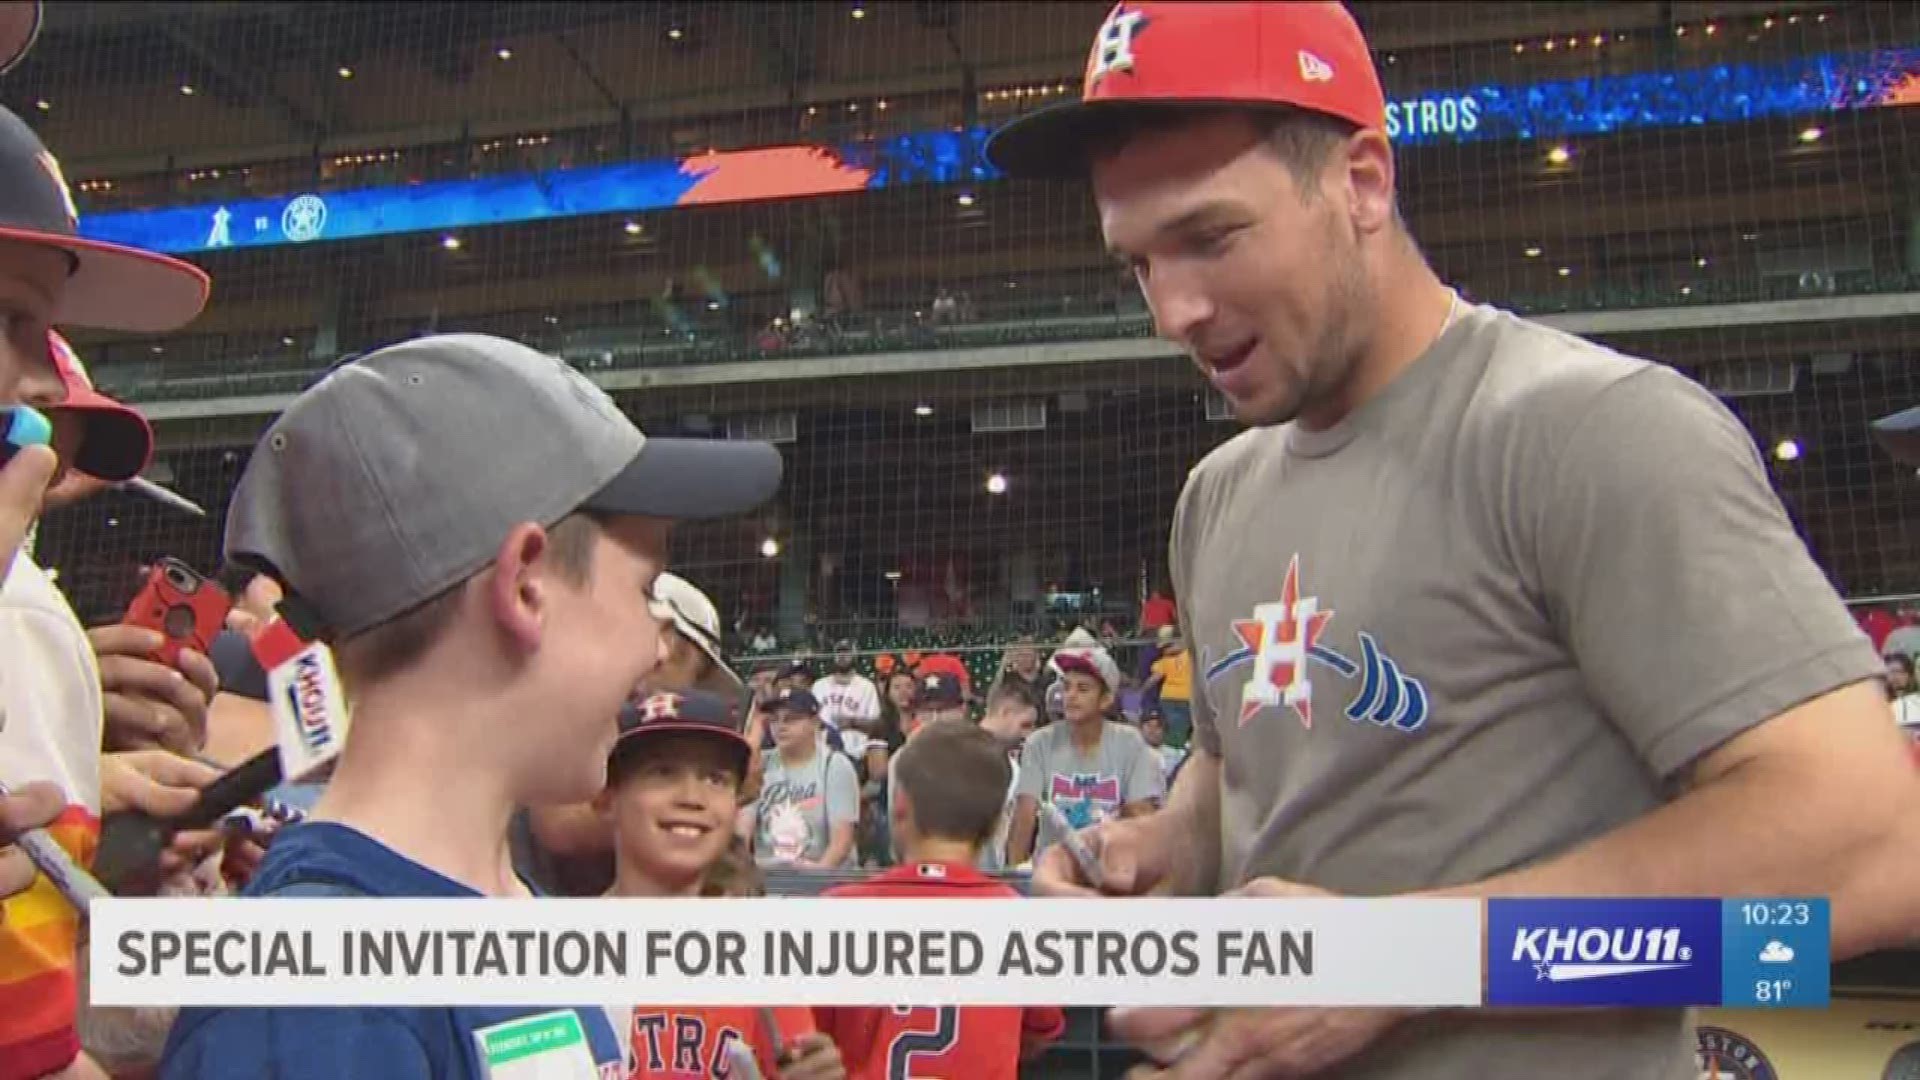 Little Astros fan gets ultimate apology after being hit by Alex